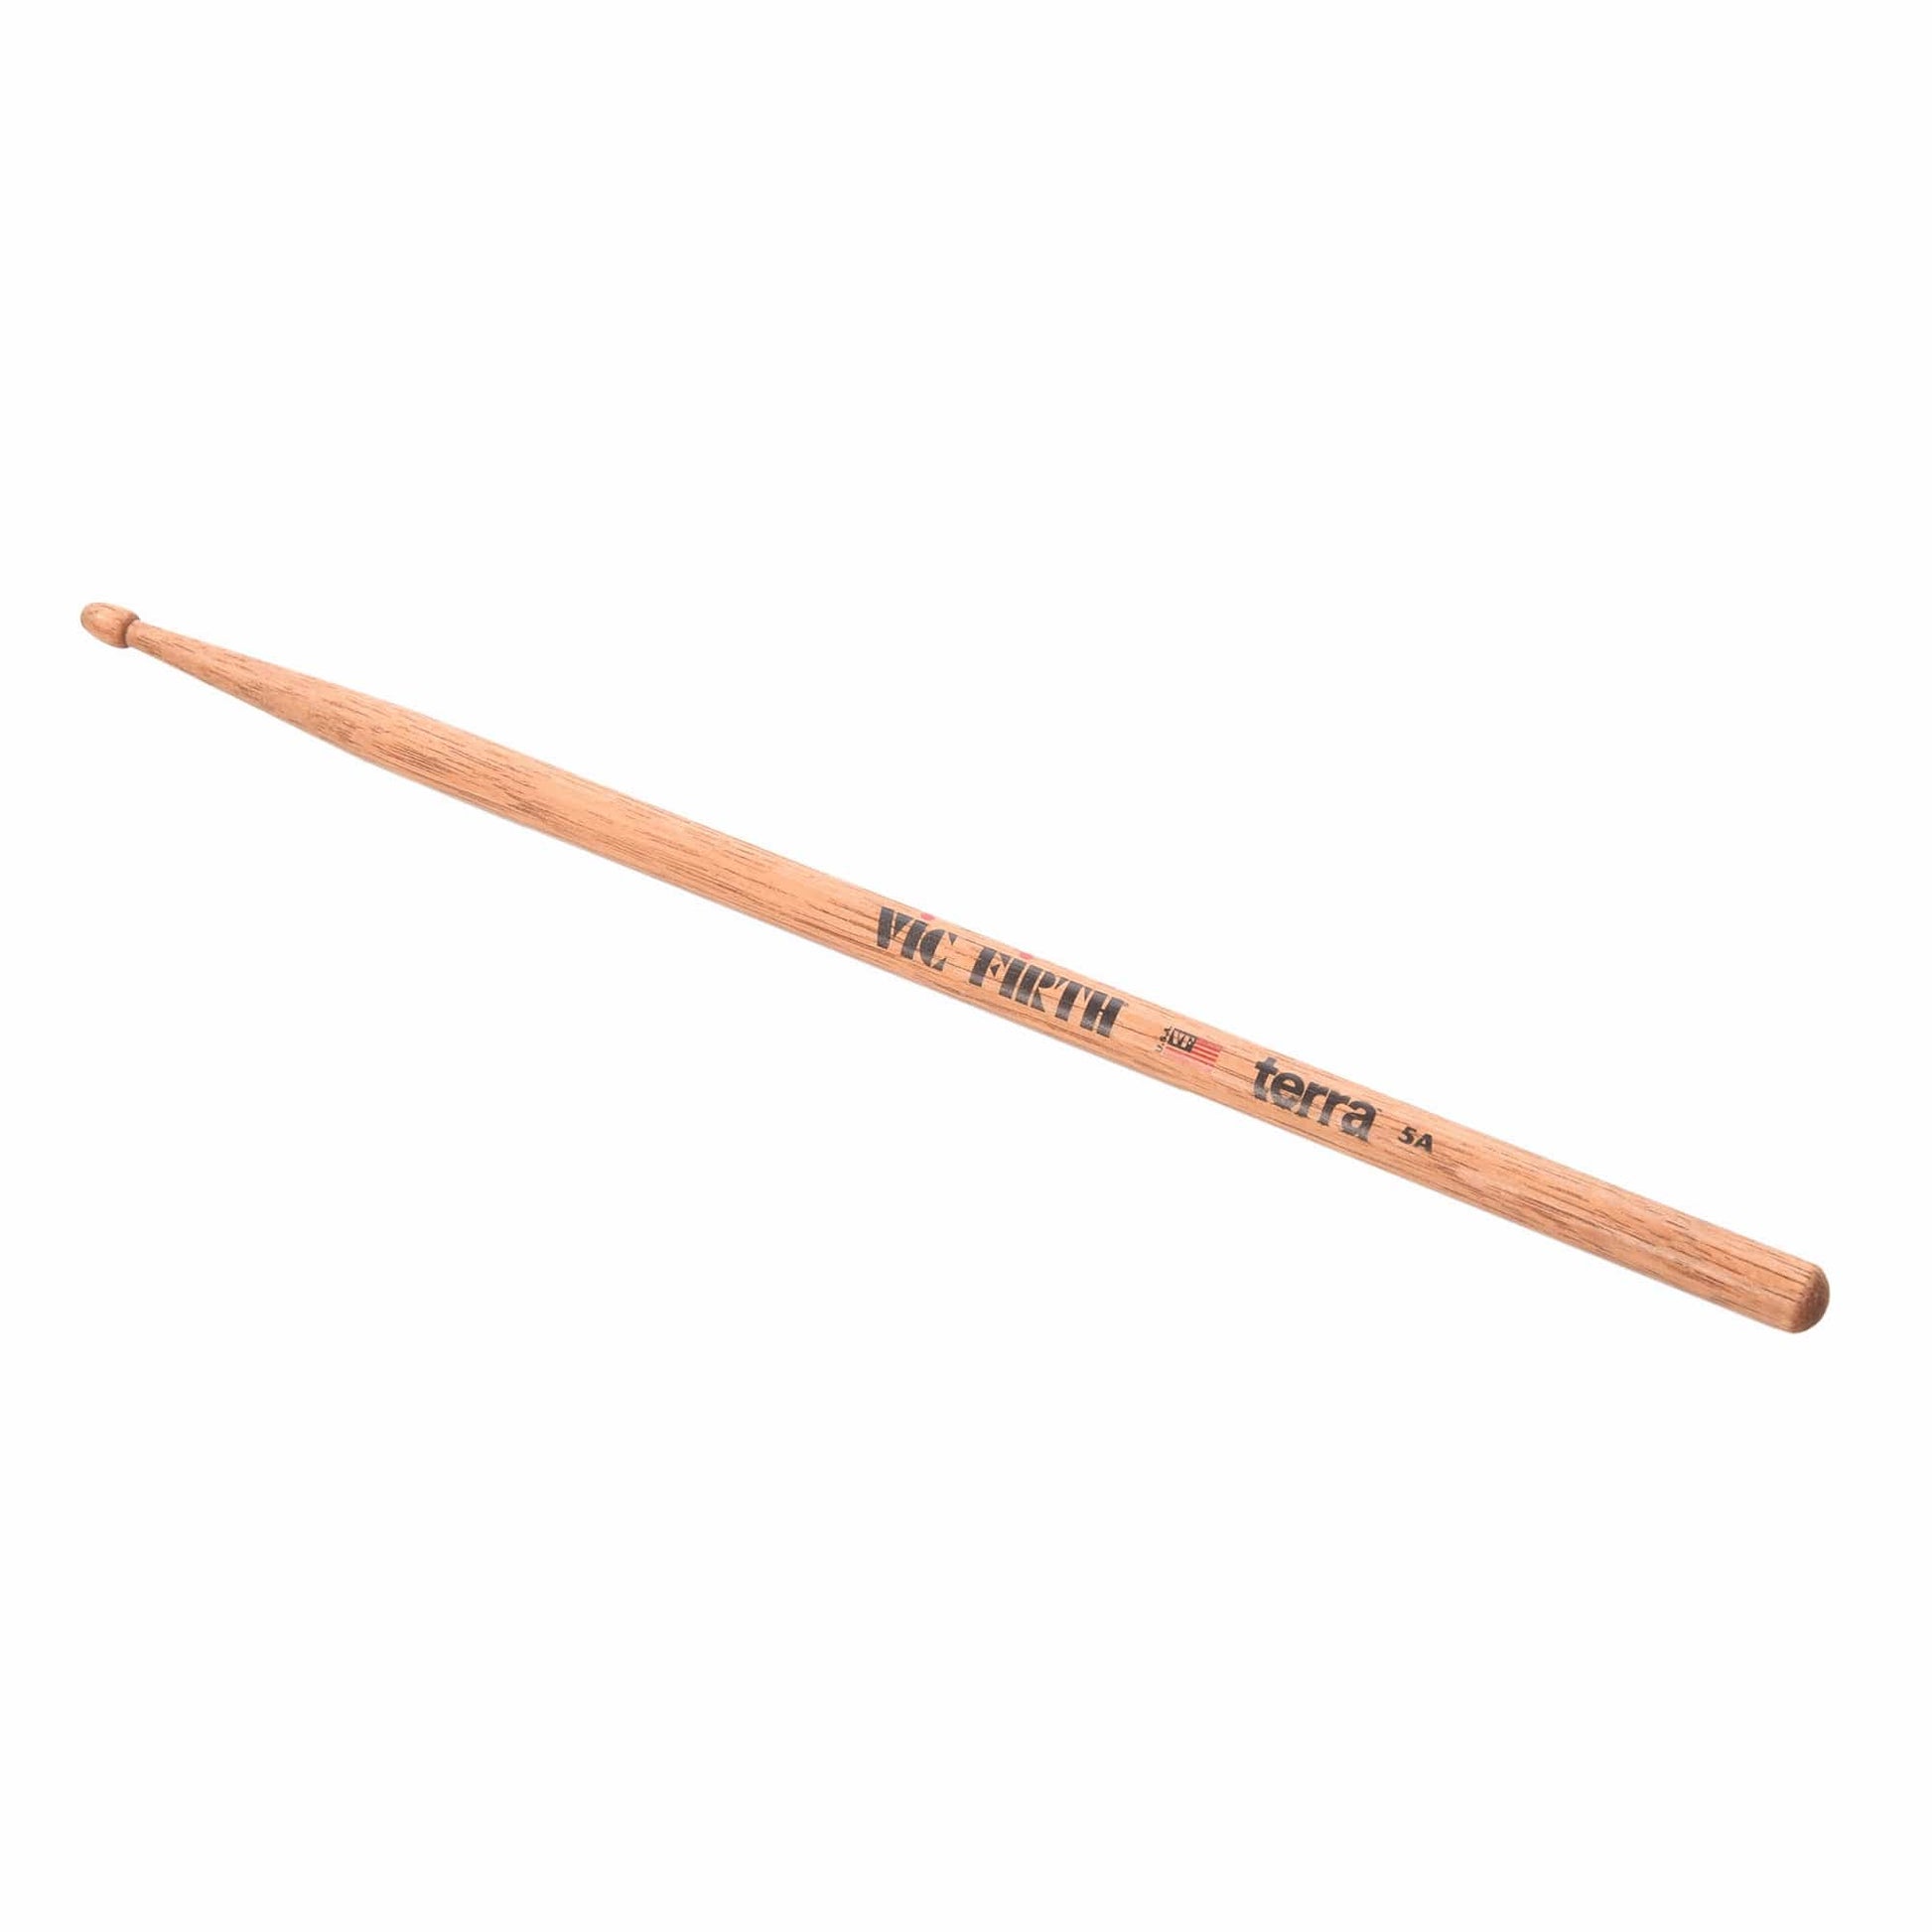 Vic Firth American Classic 5AT Terra Wood Tip Drum Sticks (3 Pair Bundle + 1 Free) Drums and Percussion / Parts and Accessories / Drum Sticks and Mallets